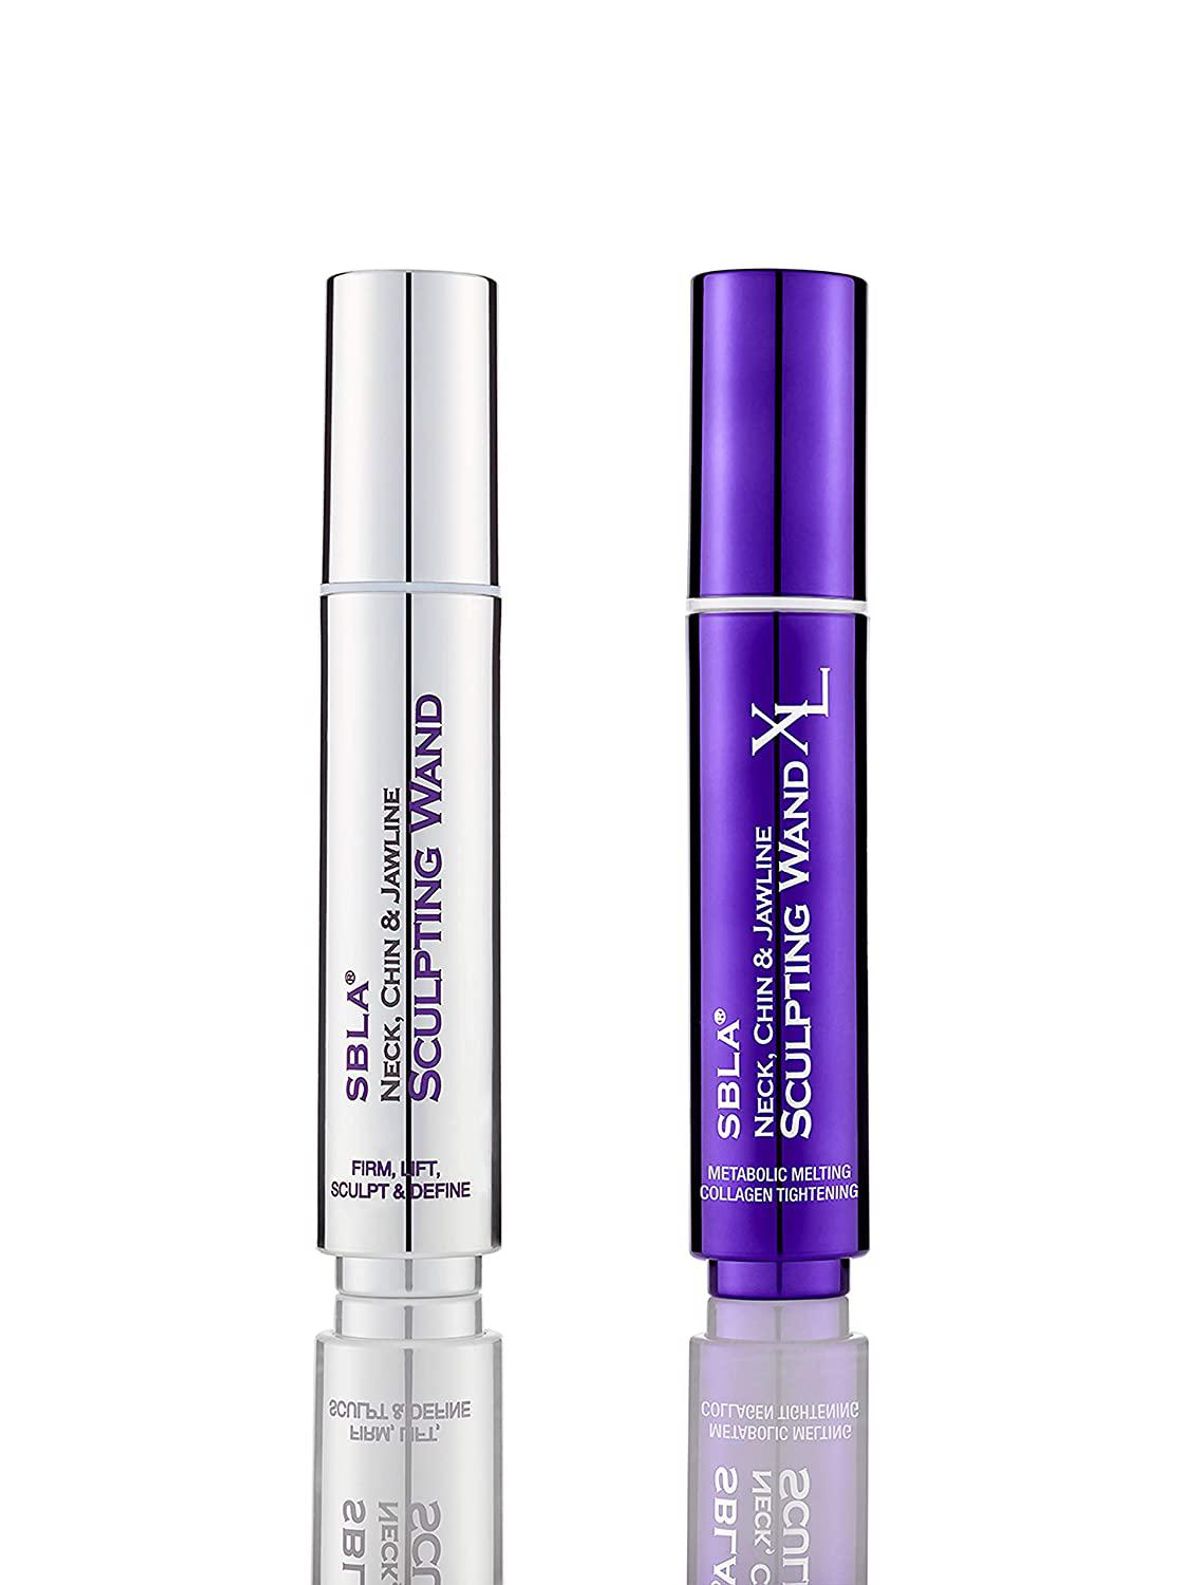 sbla neck chin and jawline sculpting wand and sculpting wand xl duo